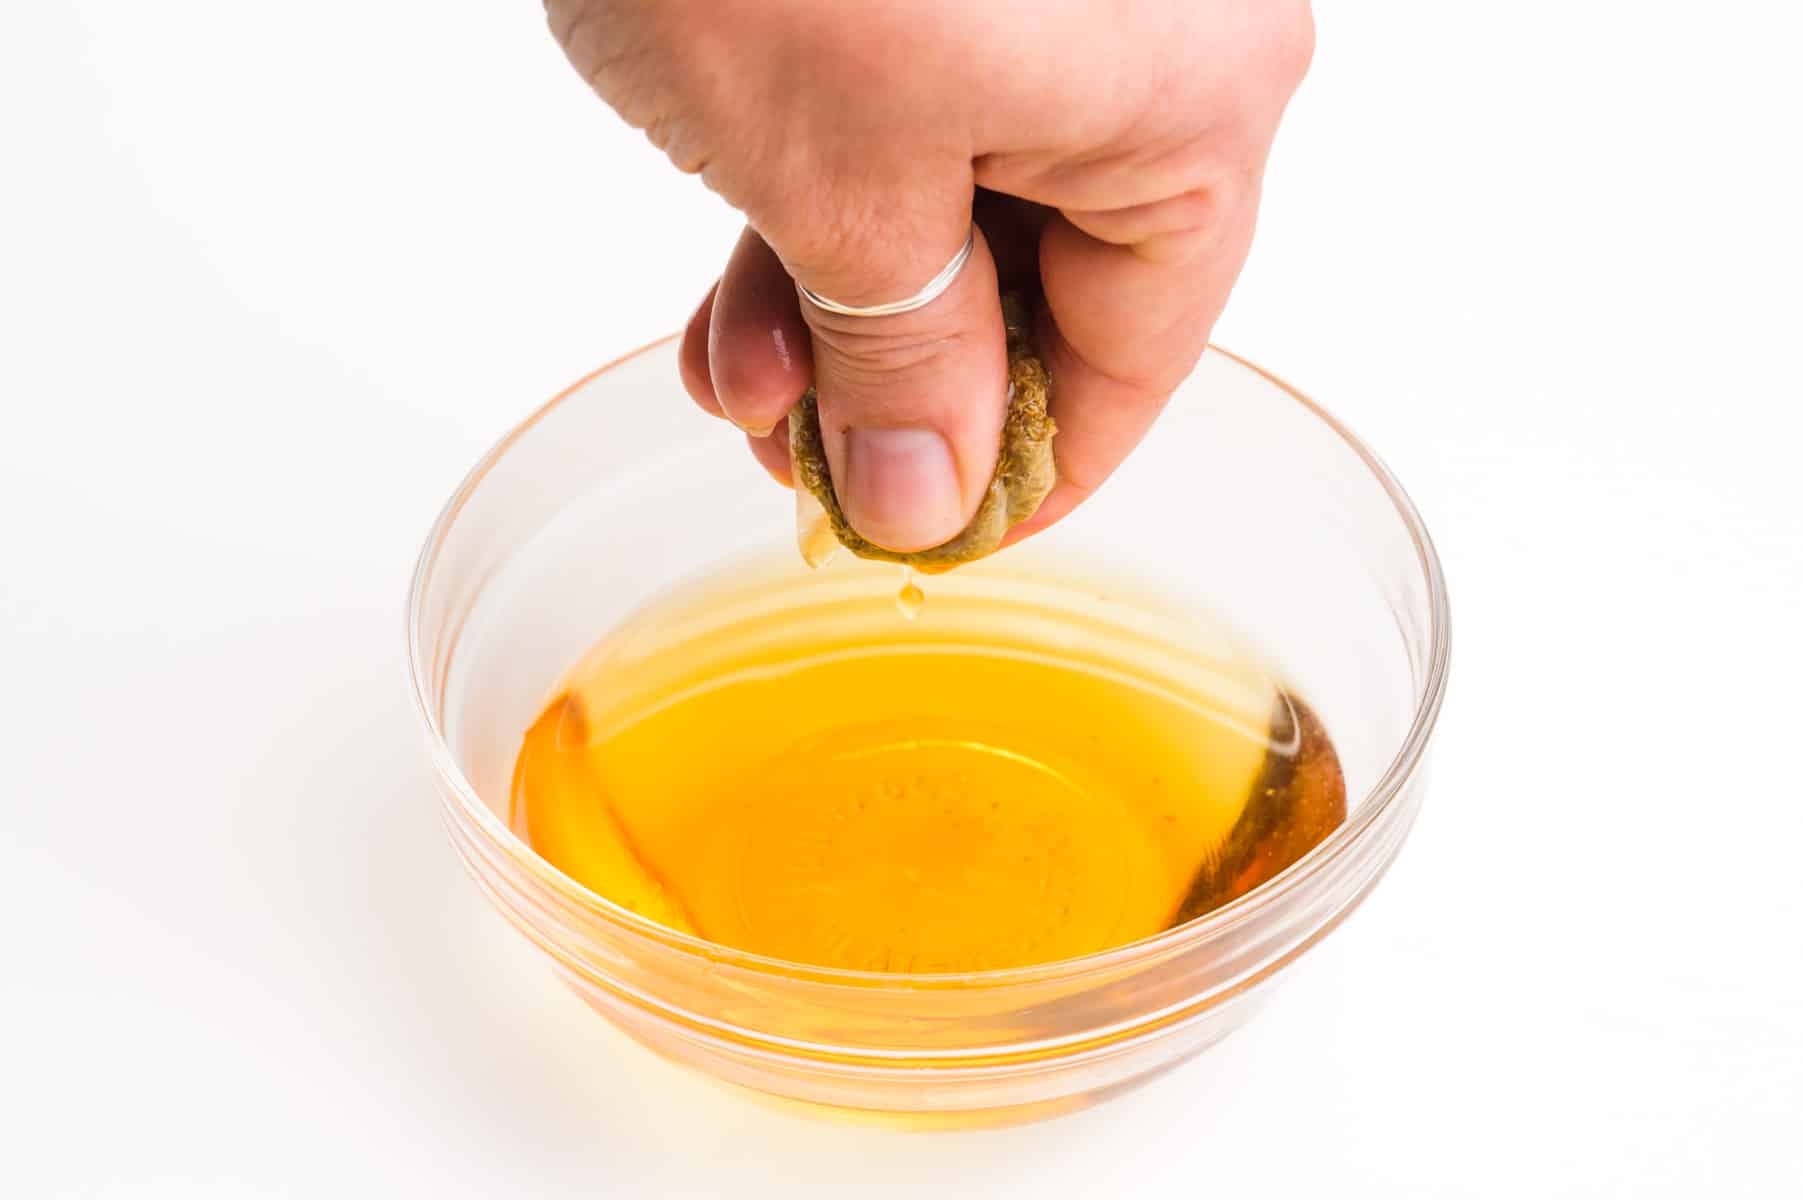 A hand holds a tea bag, squeezing it over a bowl of syrup.